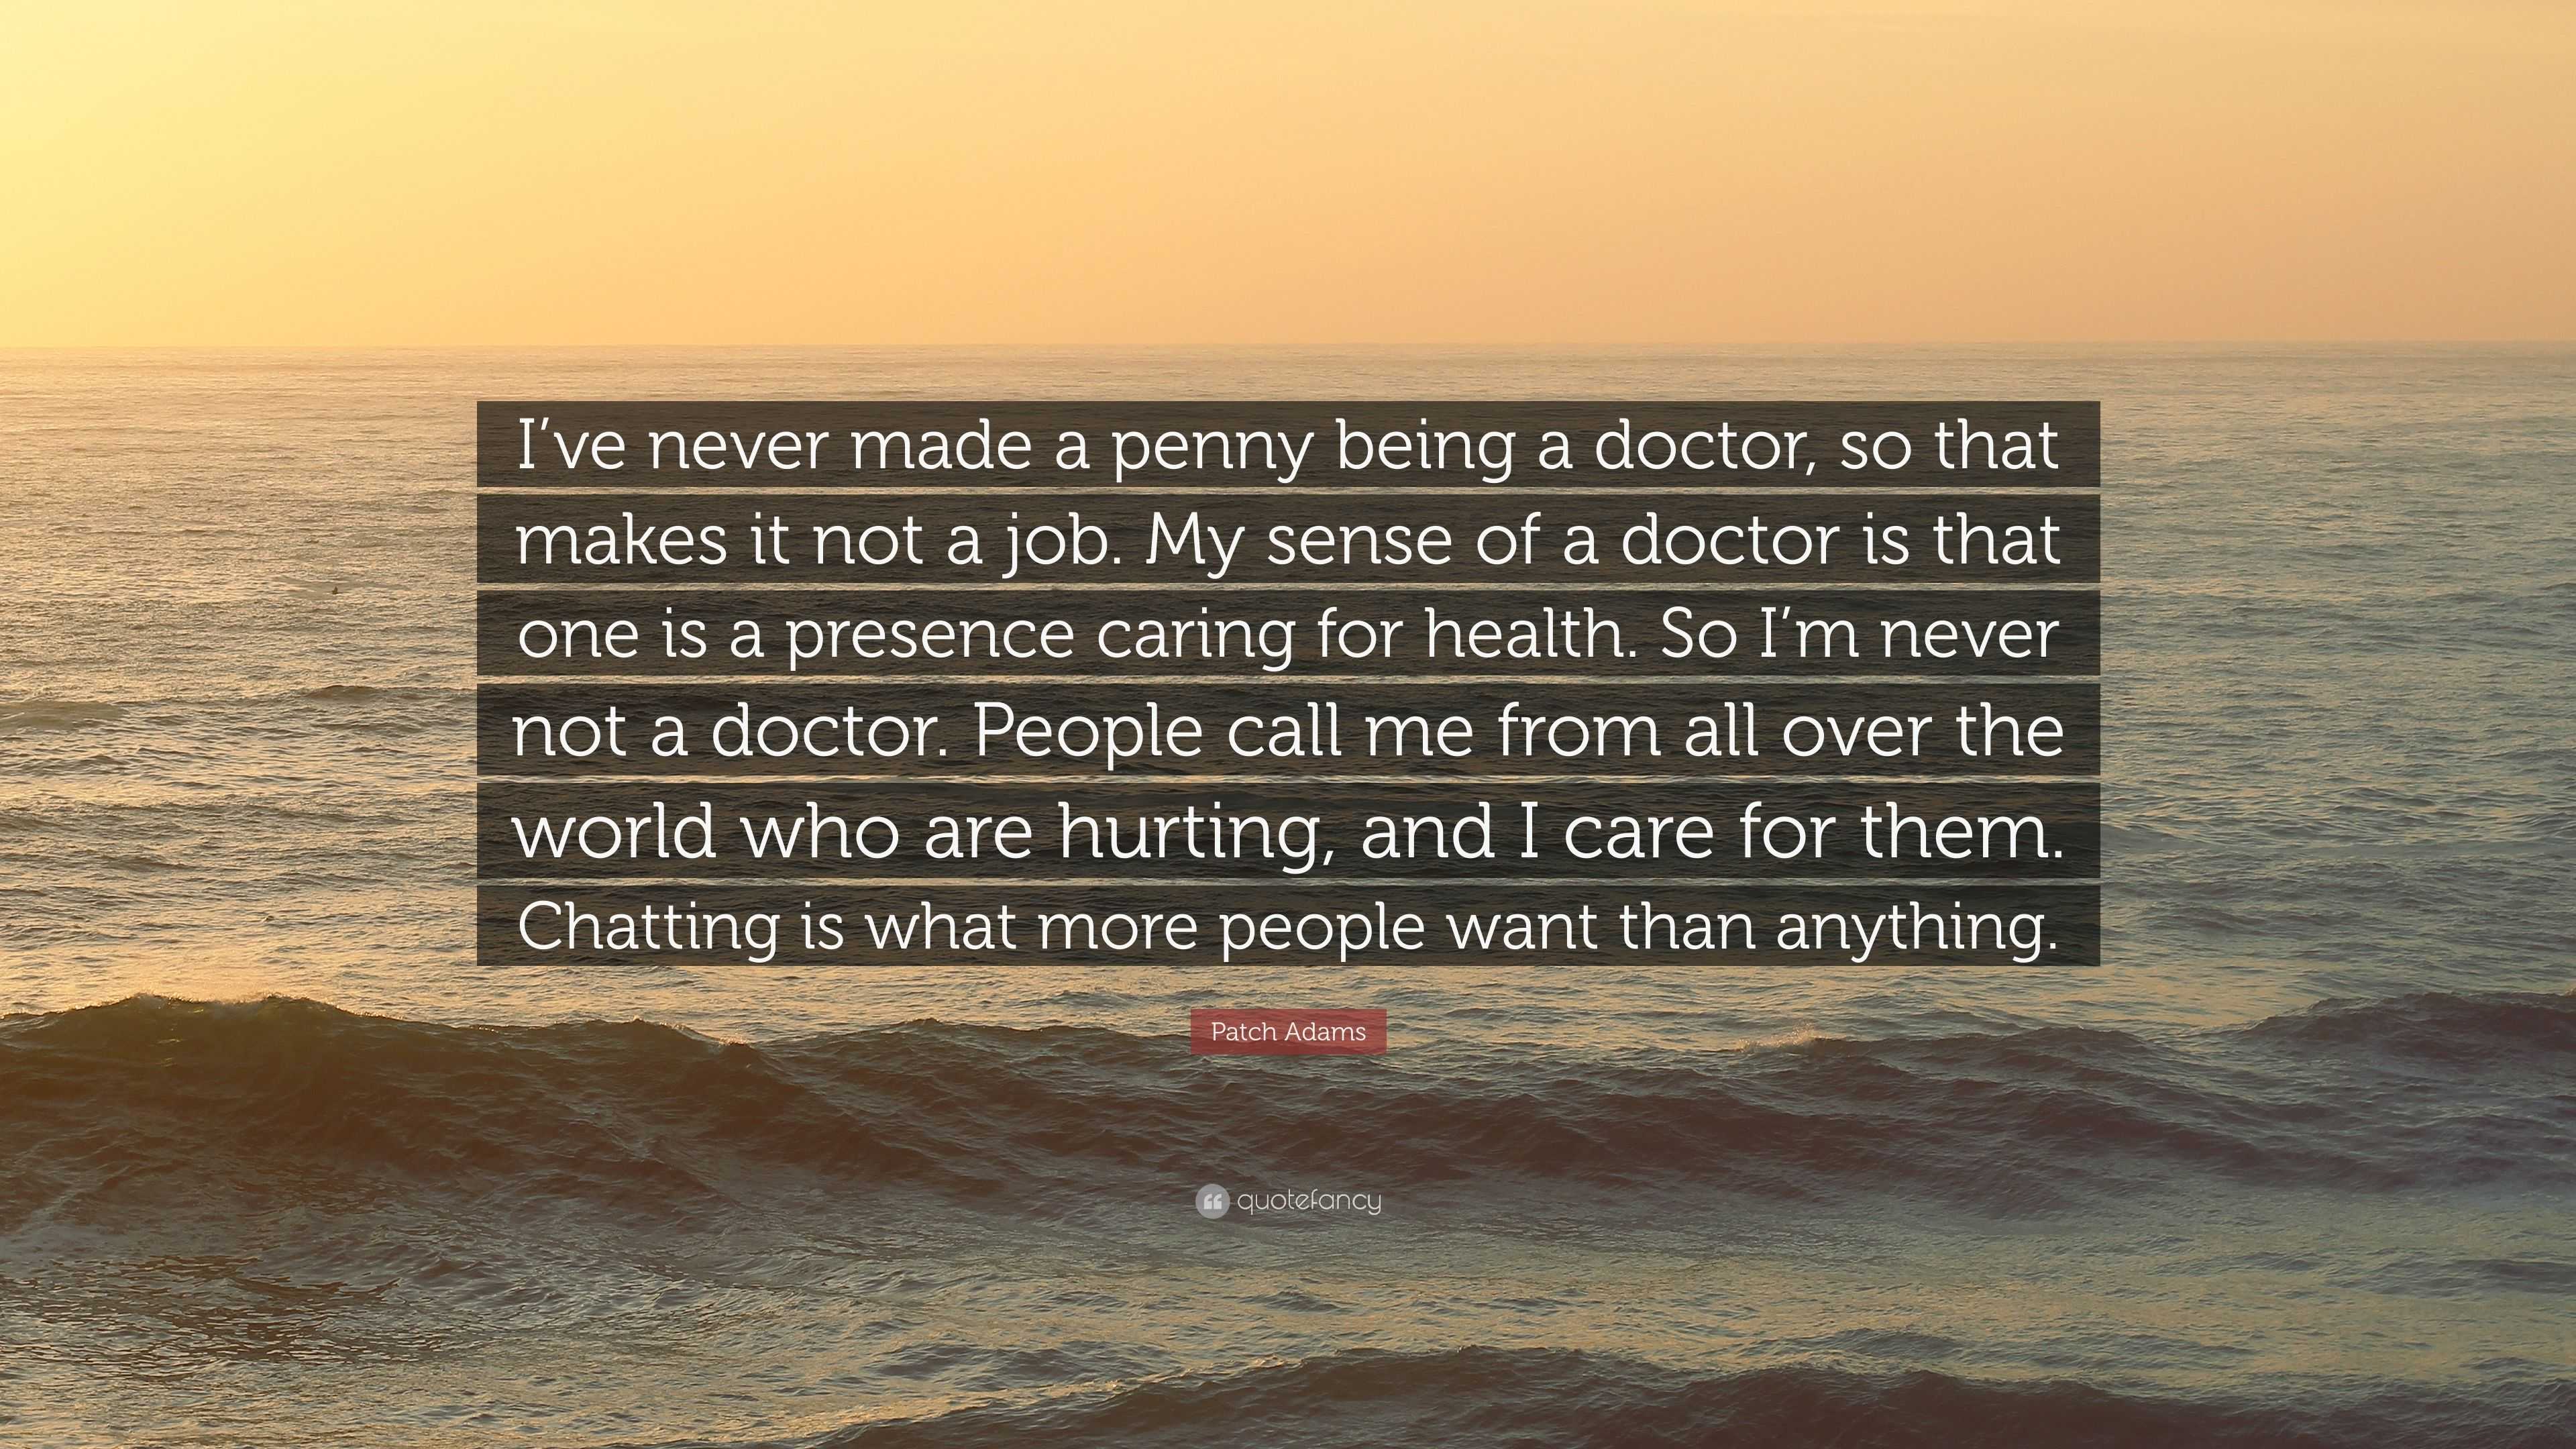 Patch Adams Quote “ive Never Made A Penny Being A Doctor So That